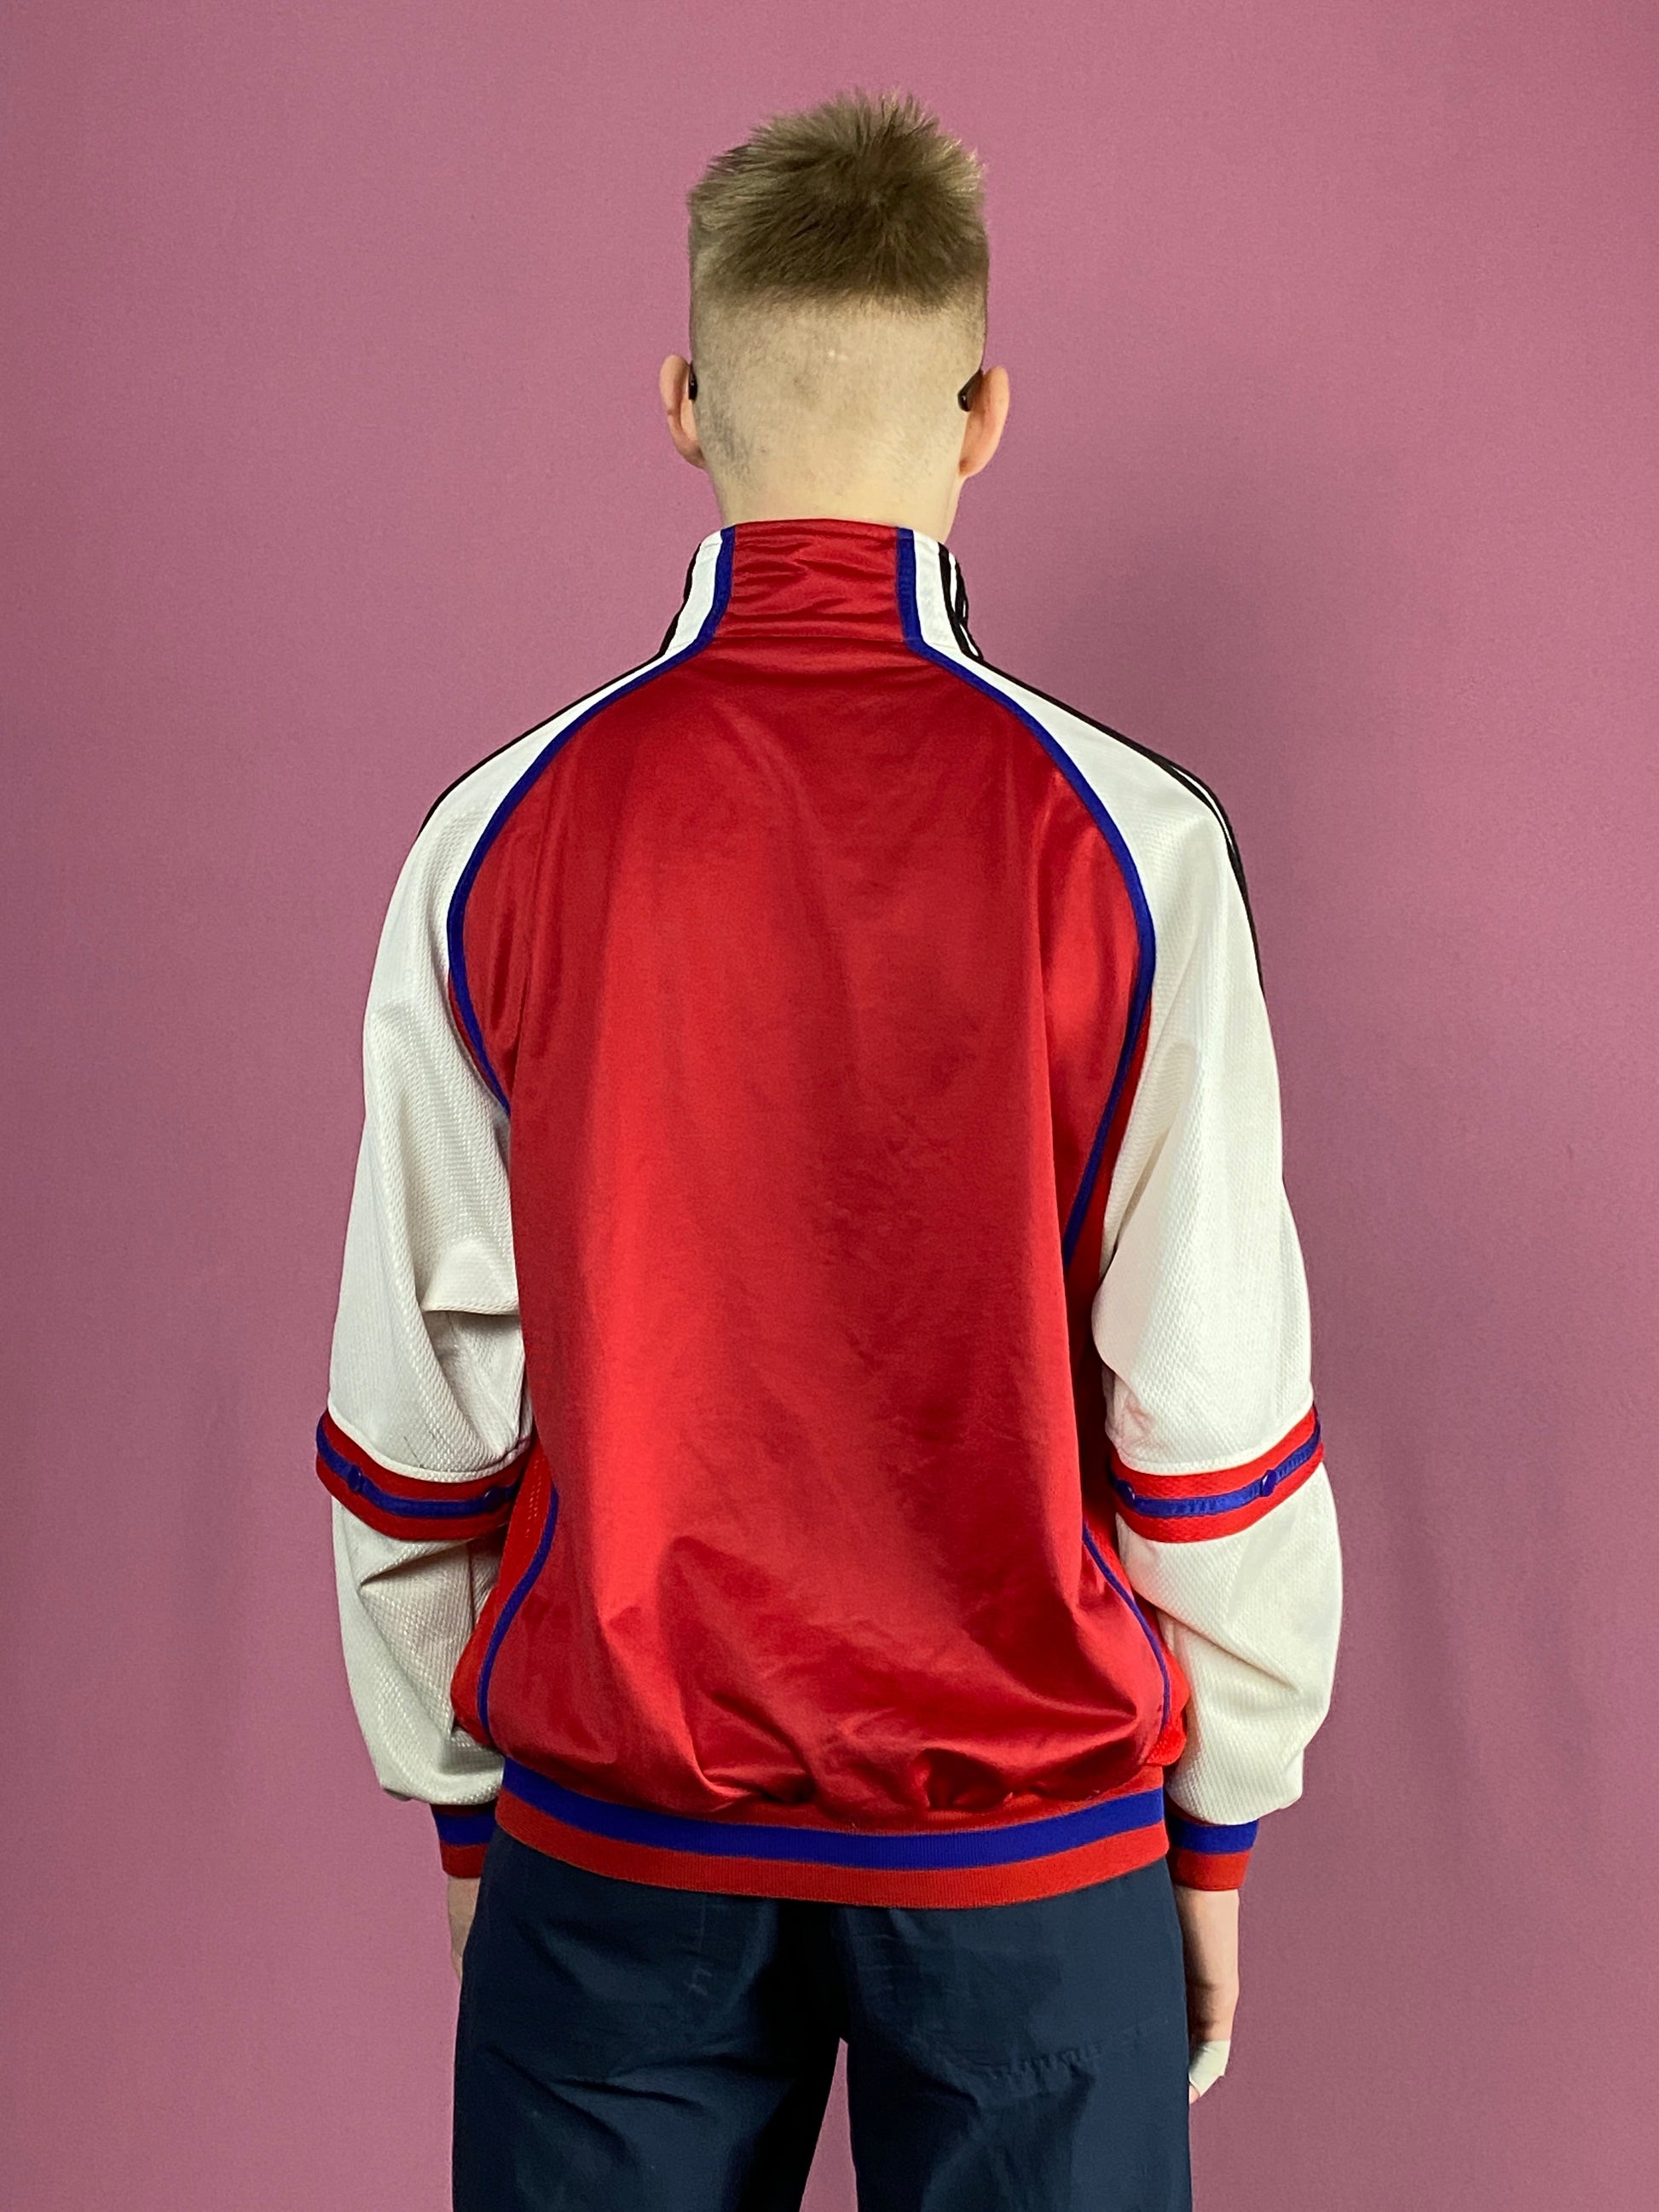 90s Adidas Vintage Men's Track Jacket - Small Red Polyester